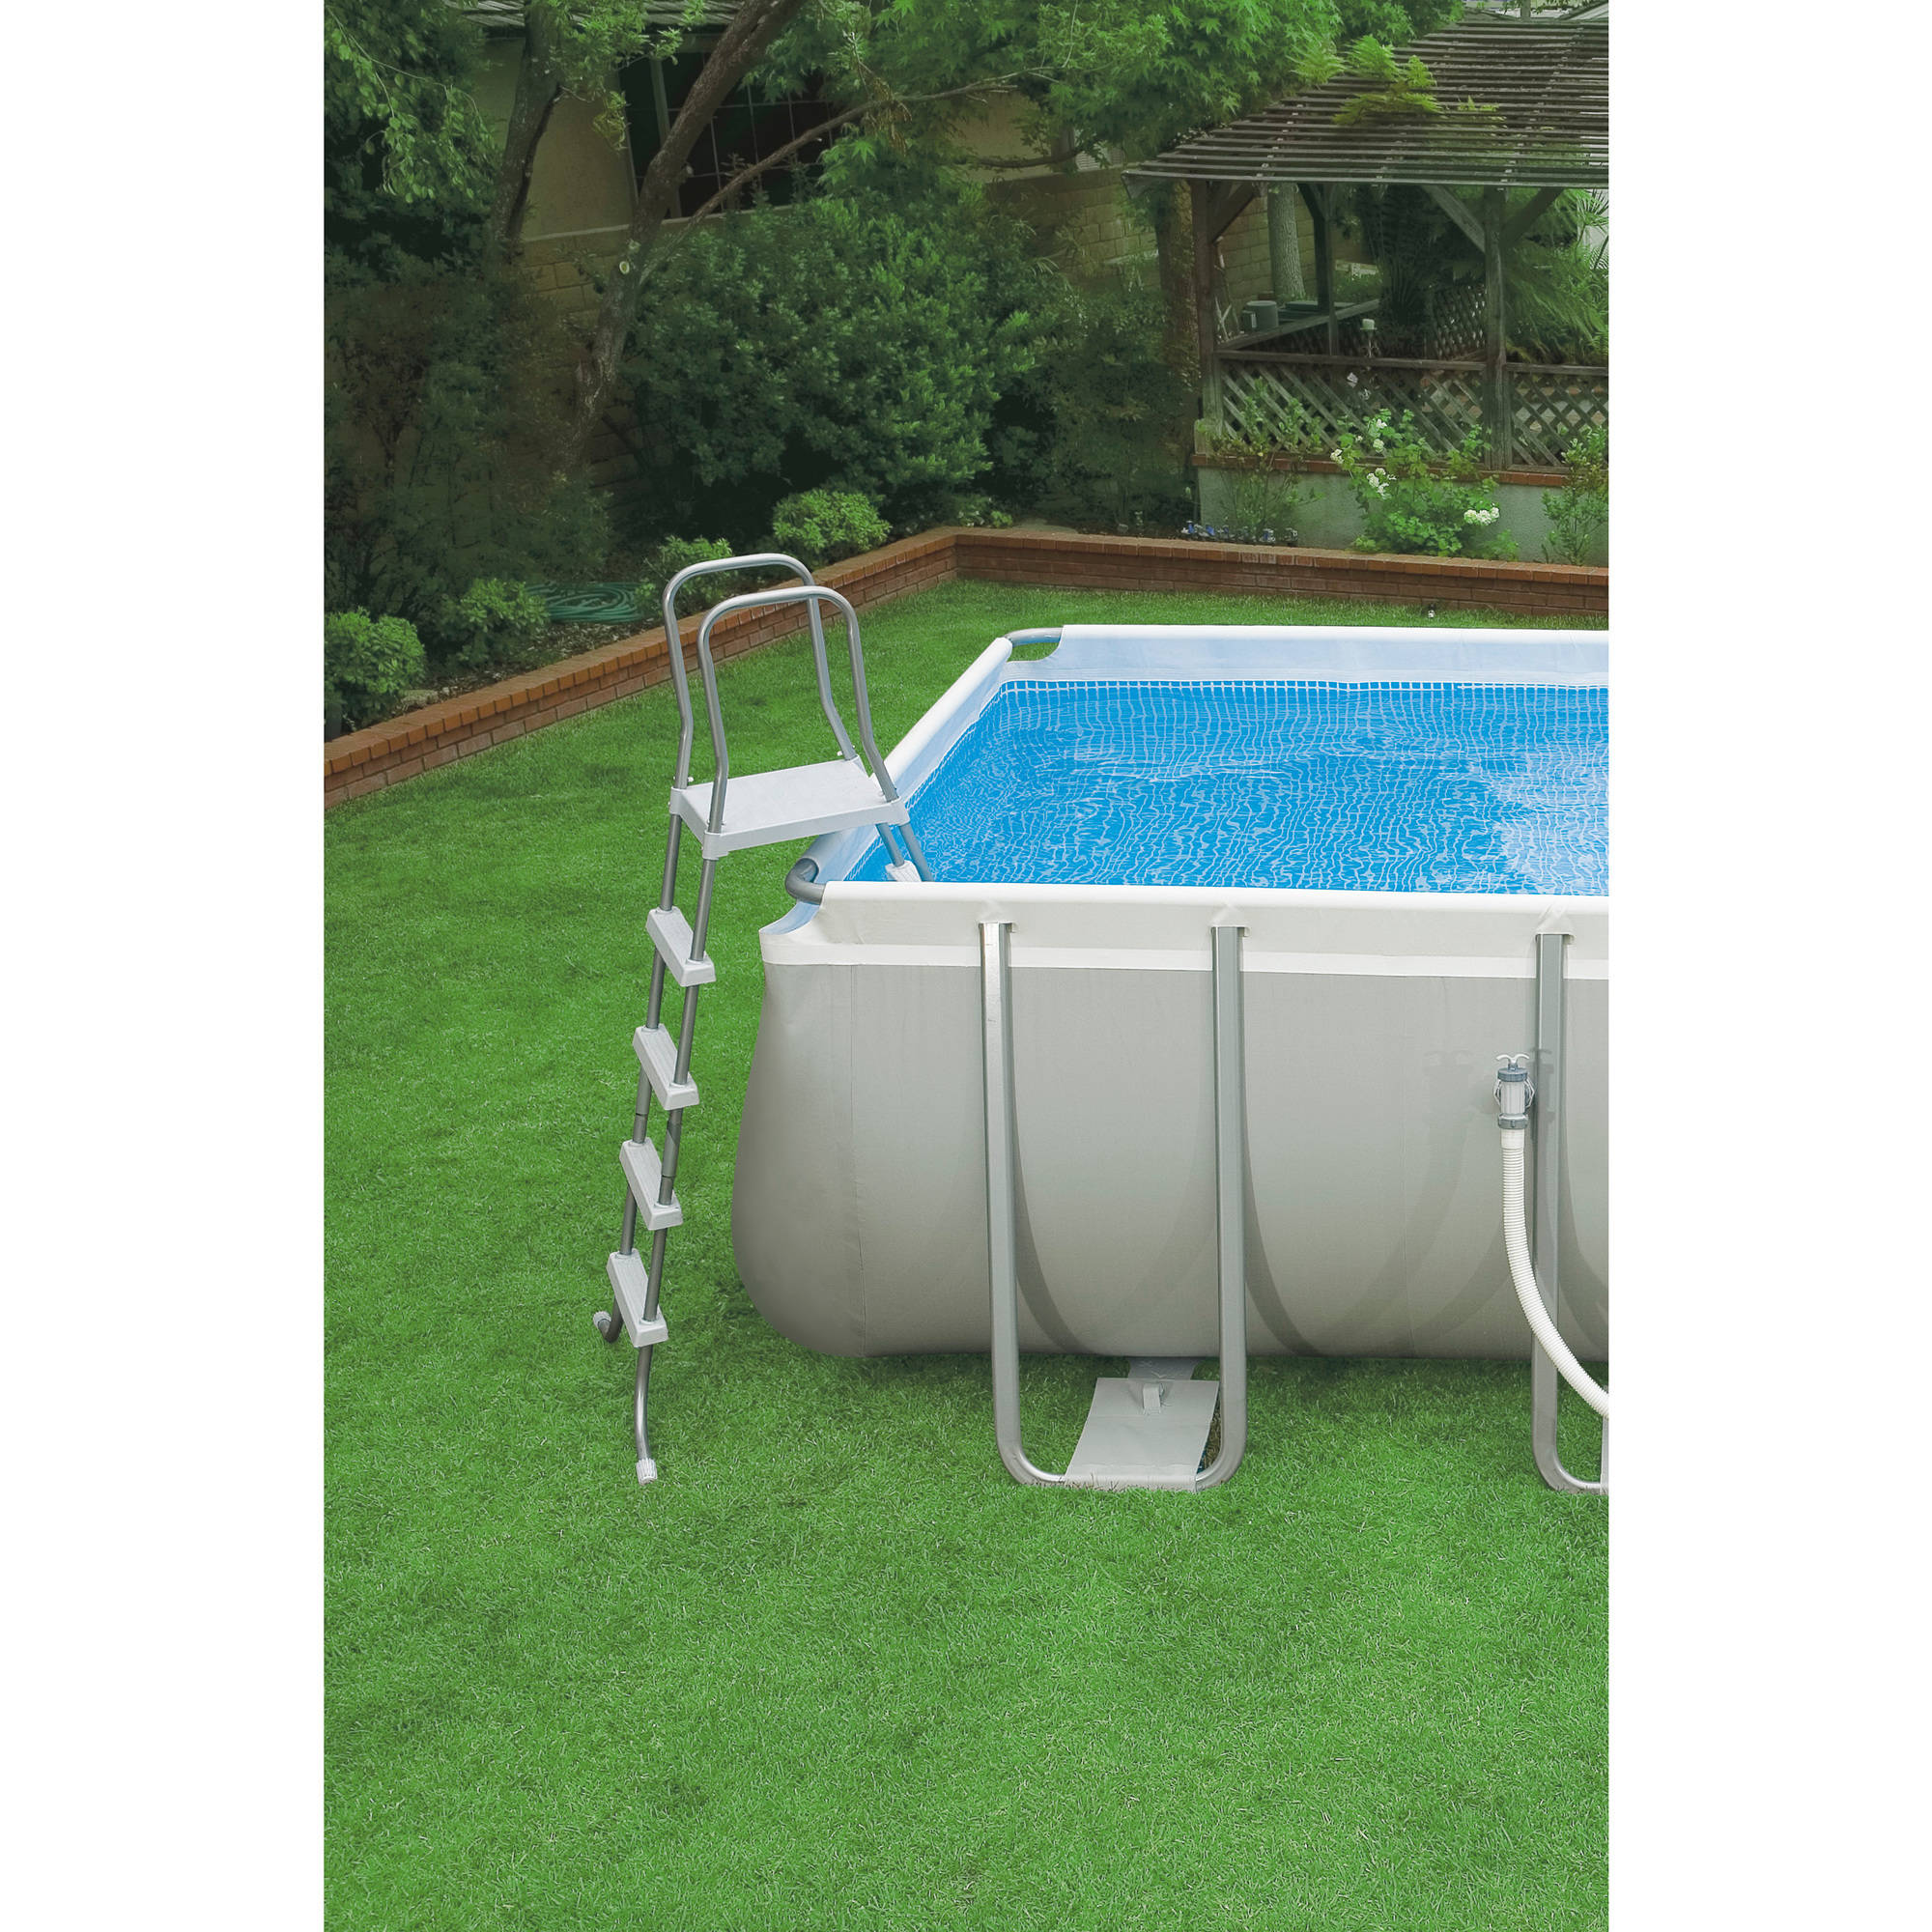 Intex 24' x 12' x 52" Ultra Frame Rectangular Above Ground Swimming Pool with Sand Filter Pump - image 3 of 6